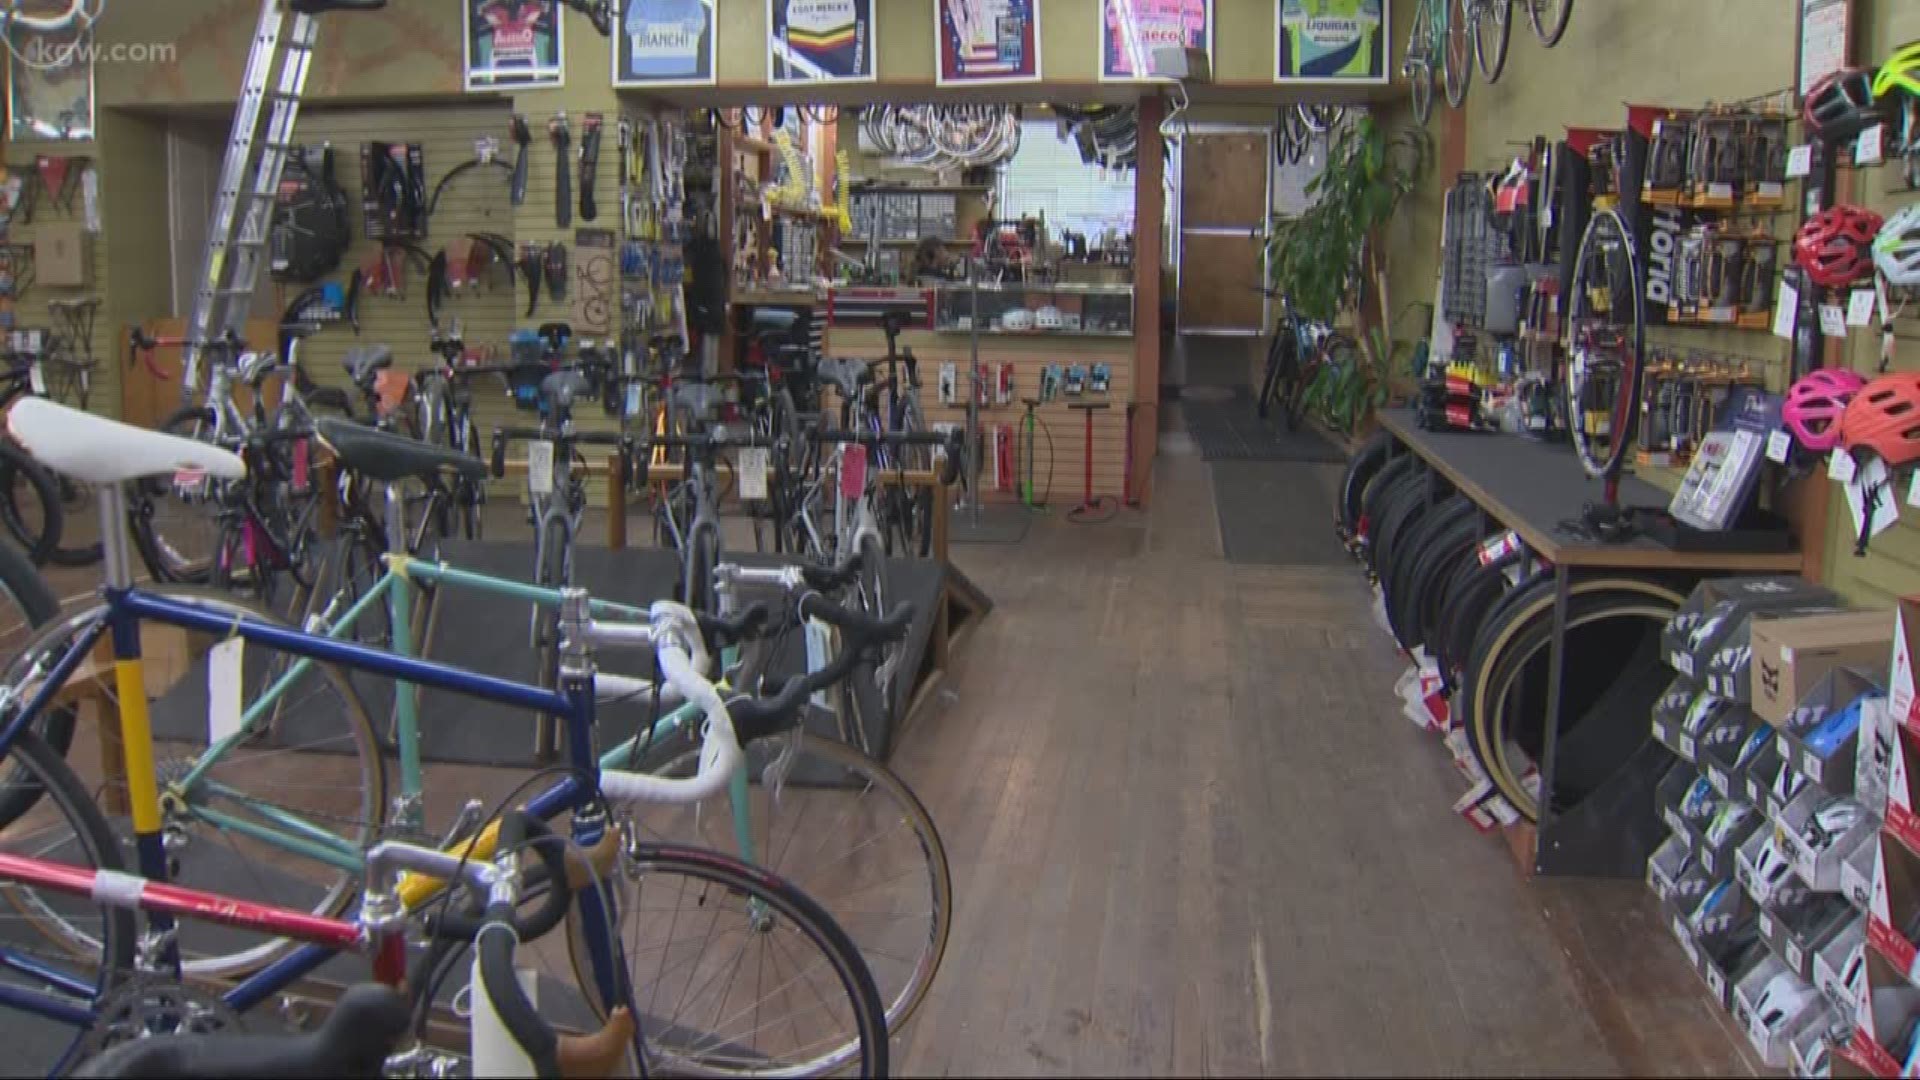 A Lake Oswego bicycle shop is in the process of recovering stolen merchandise just weeks after it was burglarized.